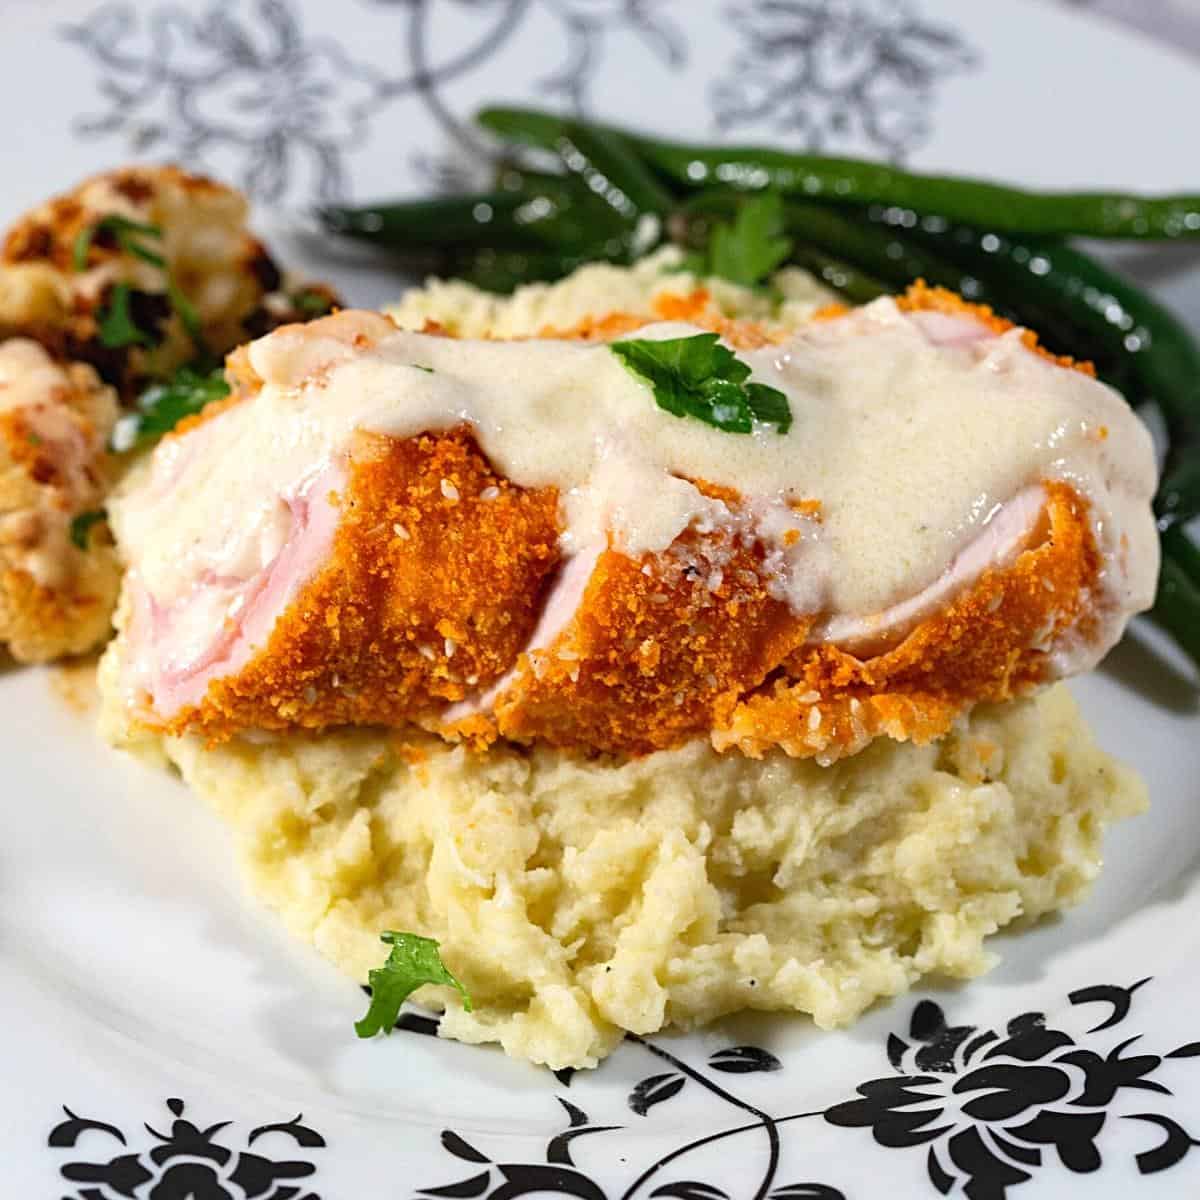 A plate with mashed potato and cordon bleu chicken.